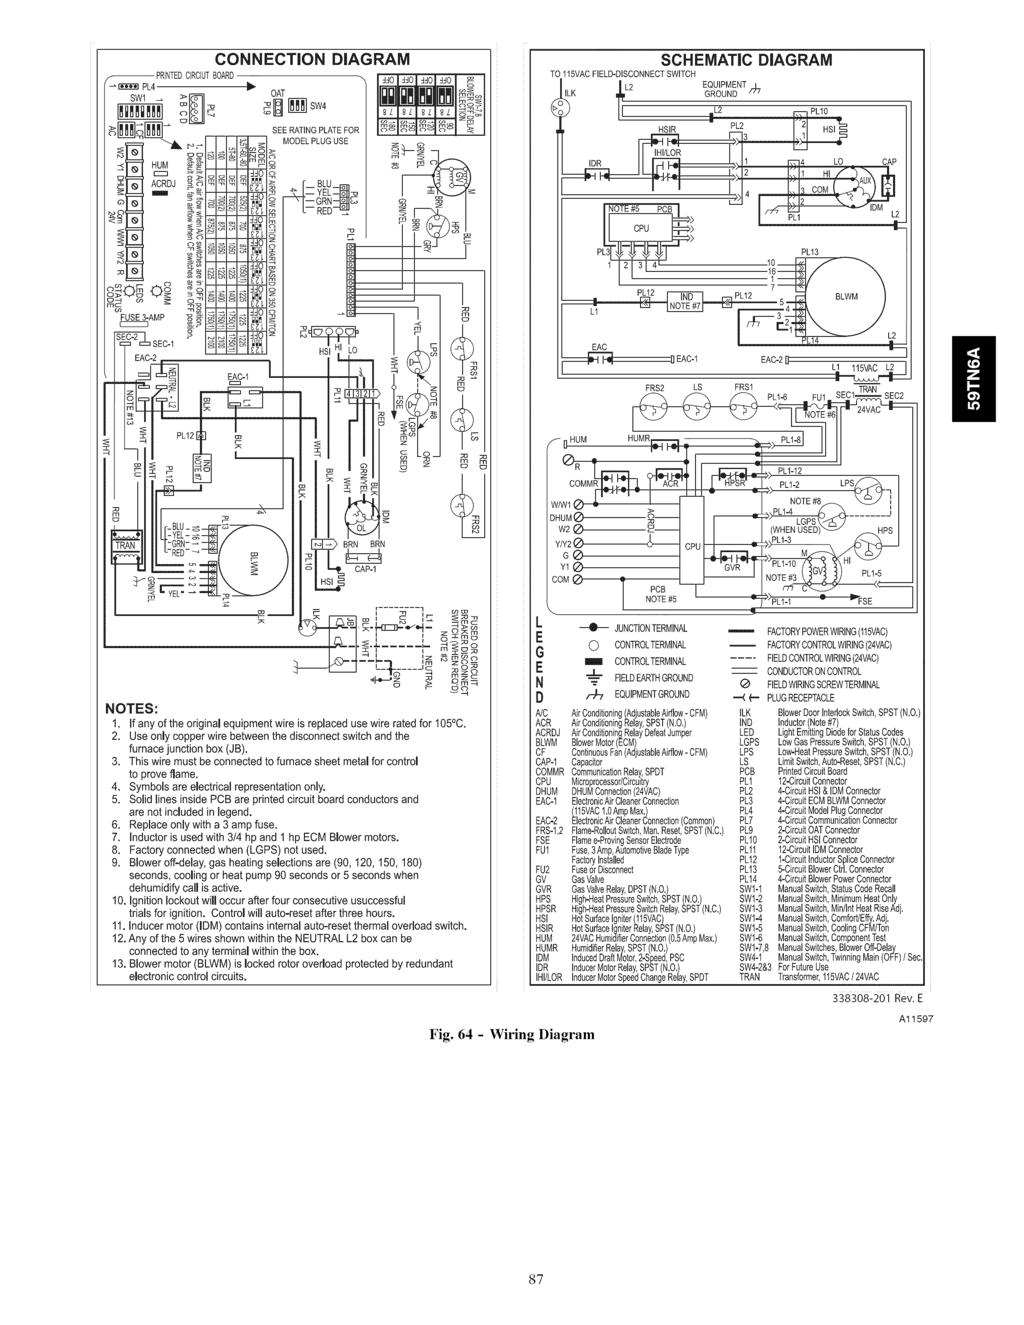 CONNECTION DIAGRAM SCHEMATIC DIAGRAM TO115VACFIELD-DISCONNECT SWITCH K _L2 EQUIPMENT GROUND _" SEE RATING PLATE FOF MODEL PLUG USE PL31 1 PL13 HSI I LO _ PLY2 PL12 r _ nlwm 1 < --4qA.